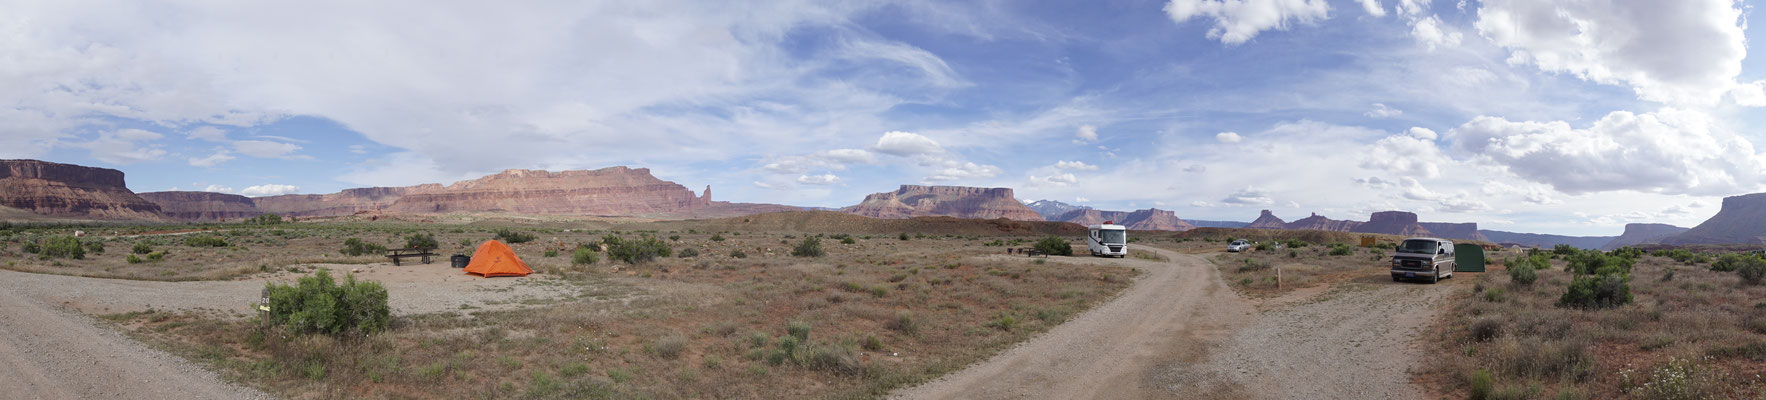 Moab, Nice View from our Camping Place